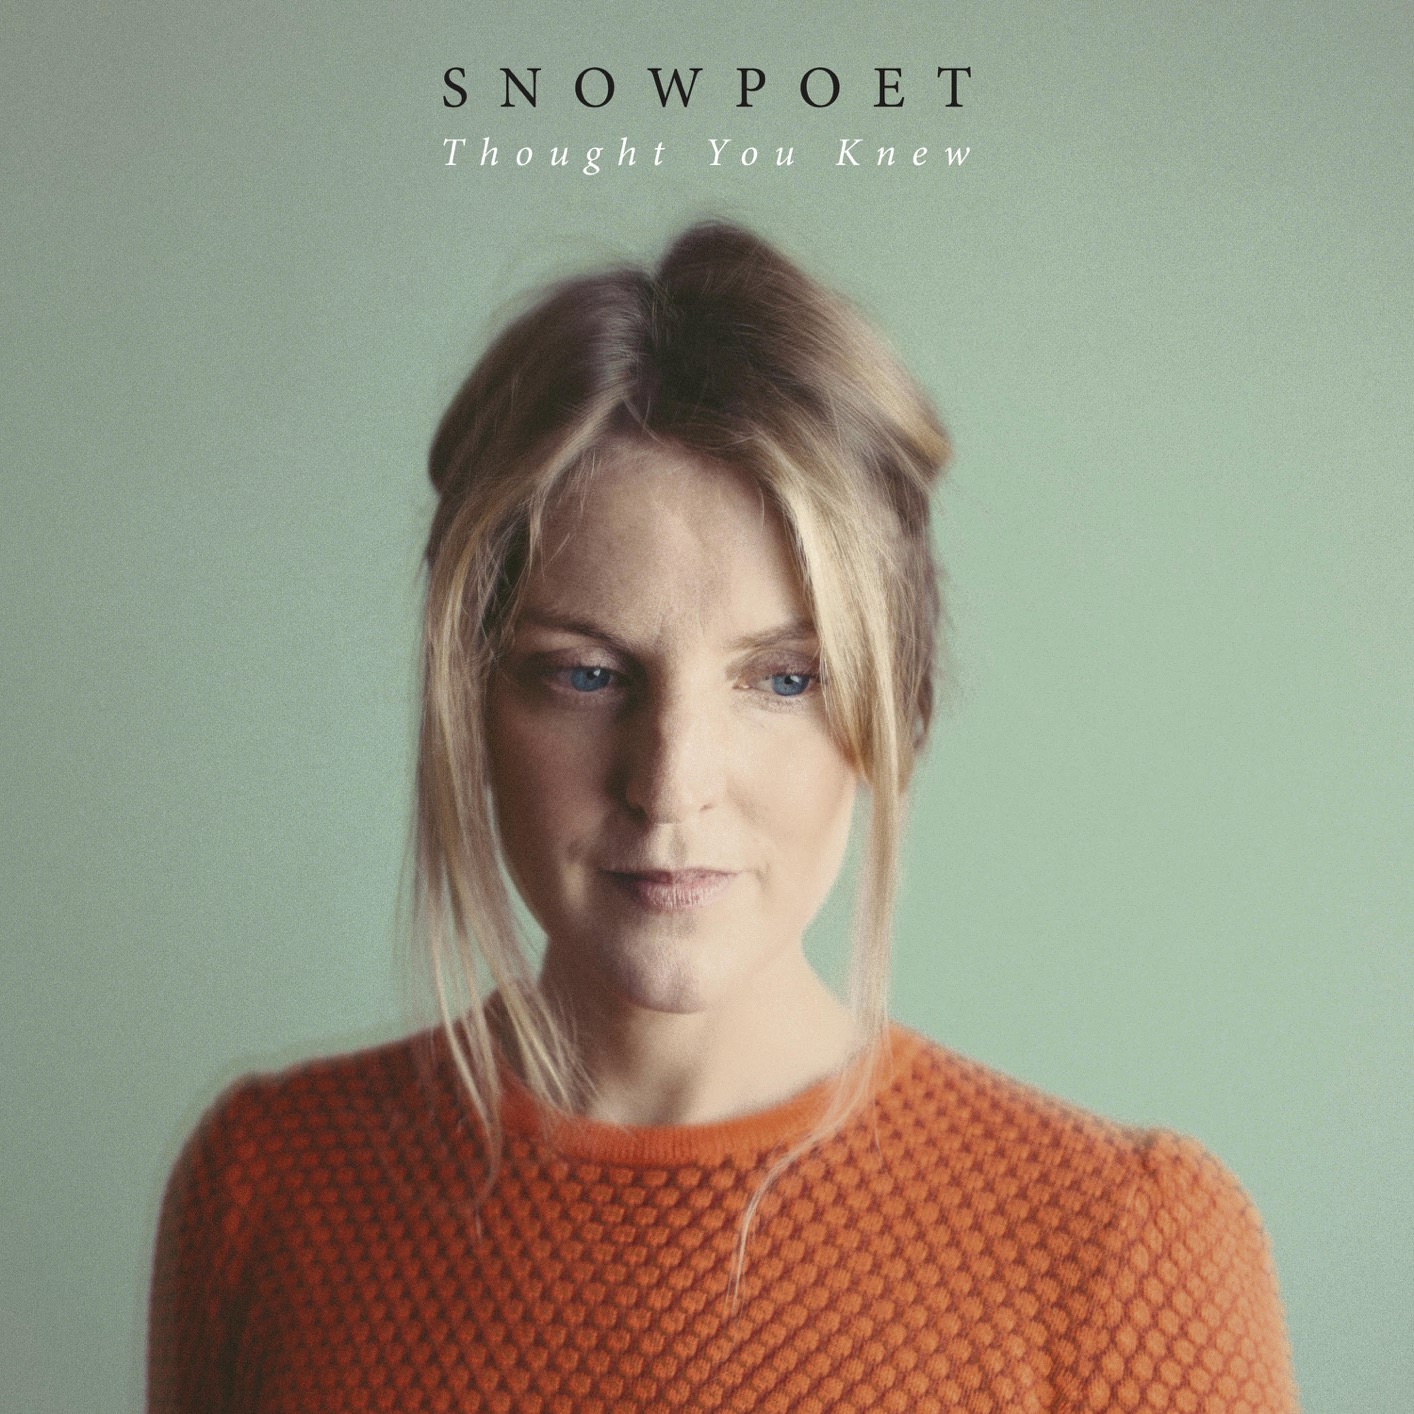 Snowpoet - Thought You Knew (2018) [FLAC 24bit/96kHz]